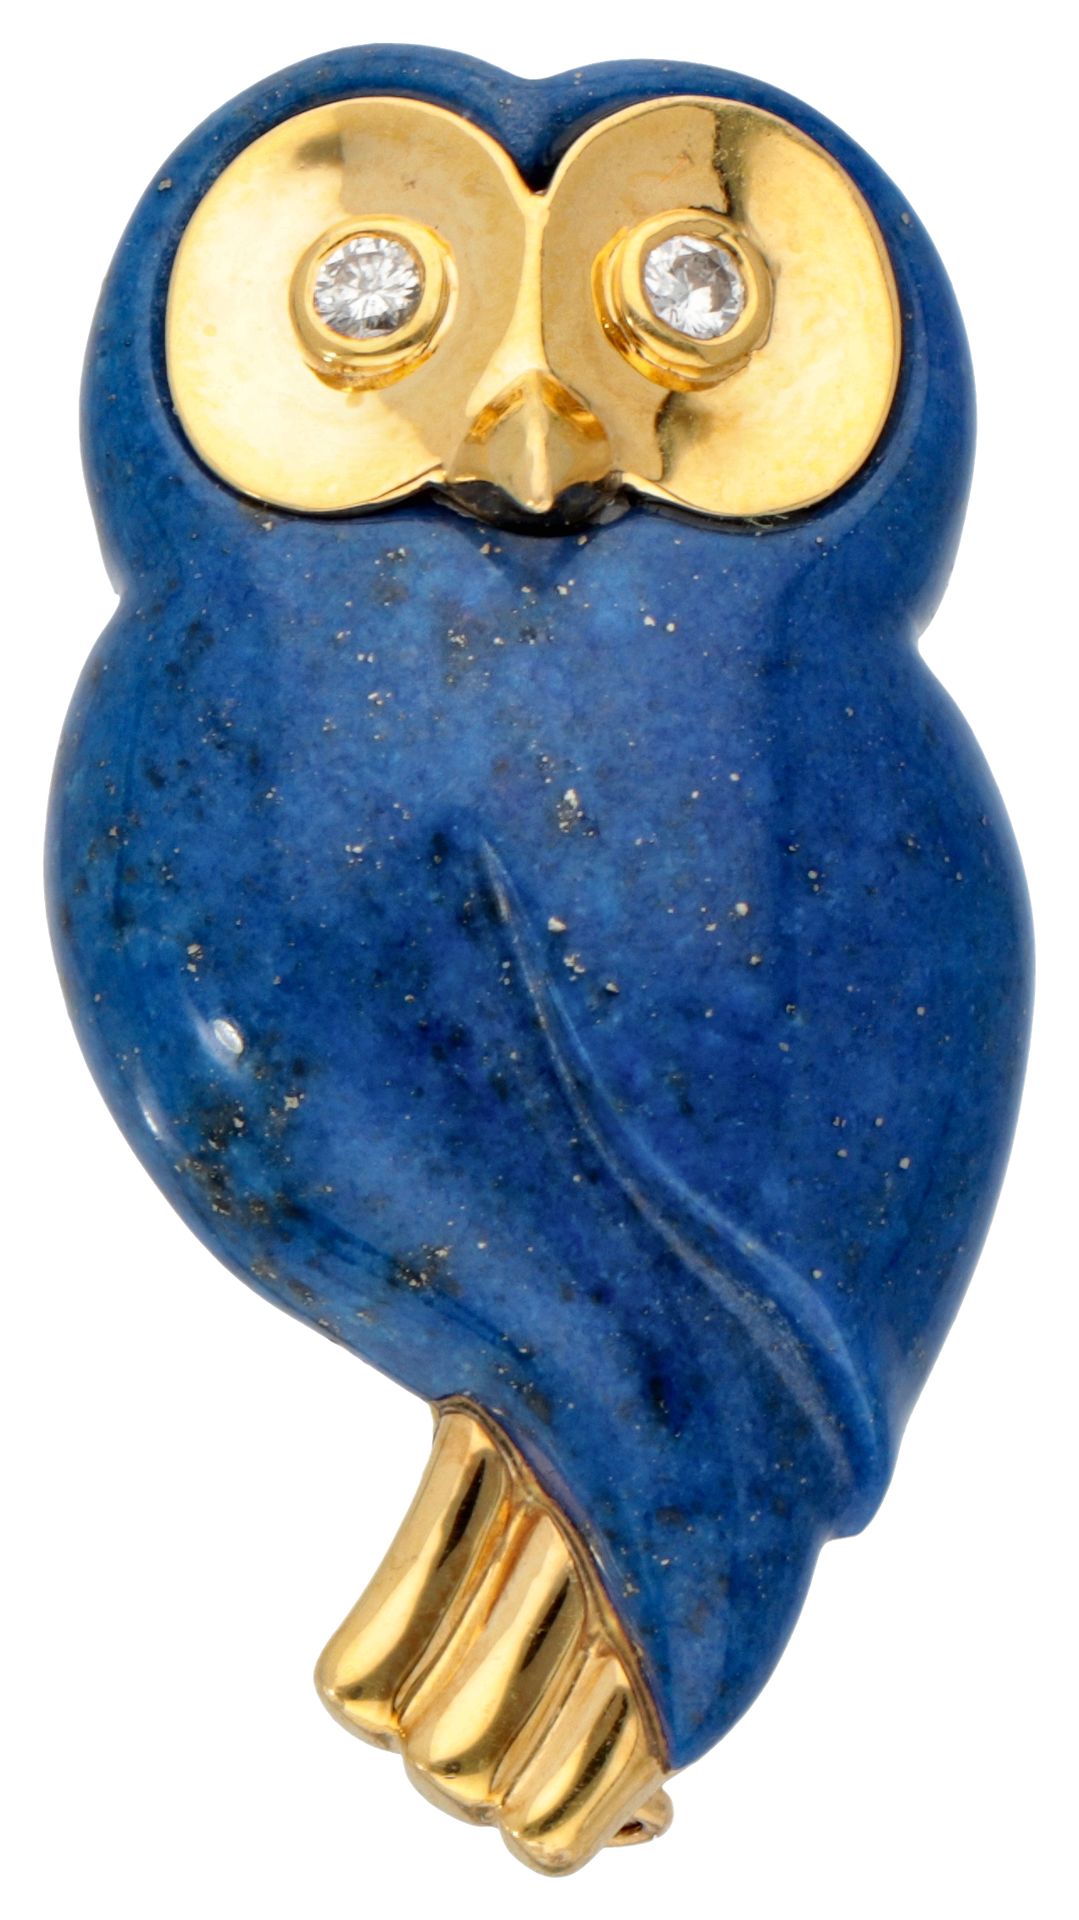 Lapis lazuli brooch with 18K. Yellow gold details depicting an owl. Mit Doppelna&hellip;